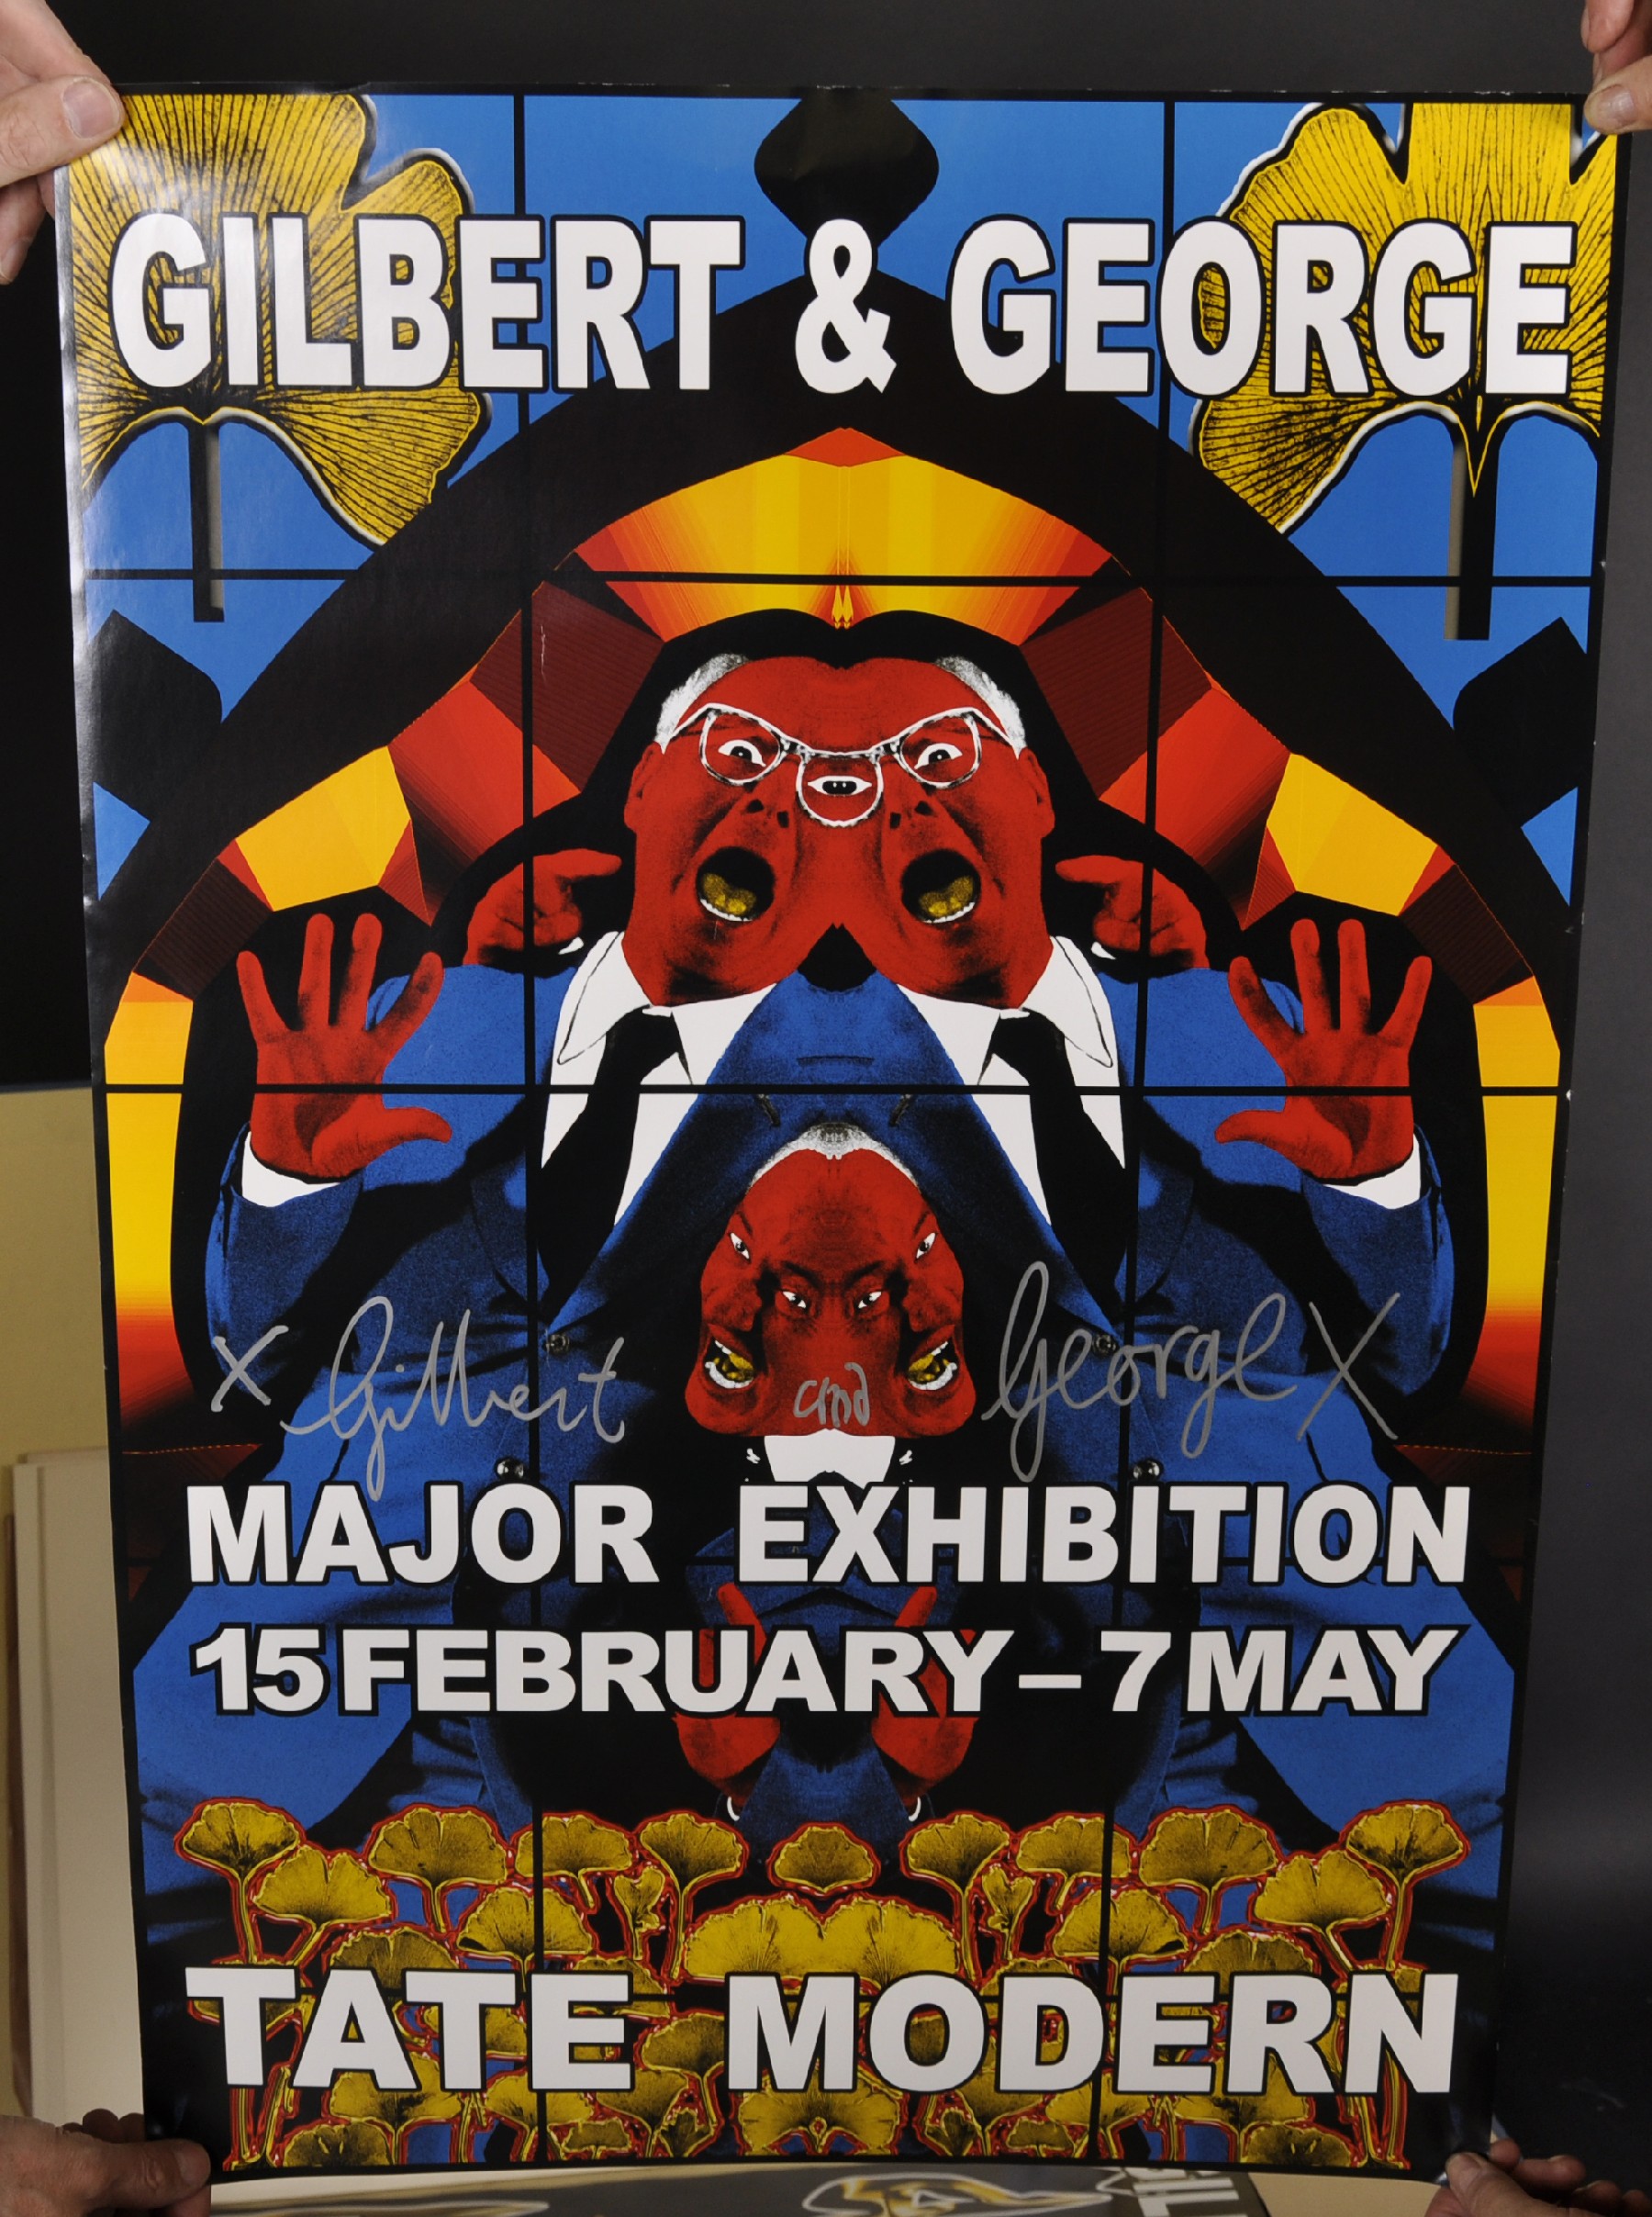 Gilbert and George (20th - 21st Century) British. "Major Exhibition Tate Modern", Poster, Signed - Image 6 of 6